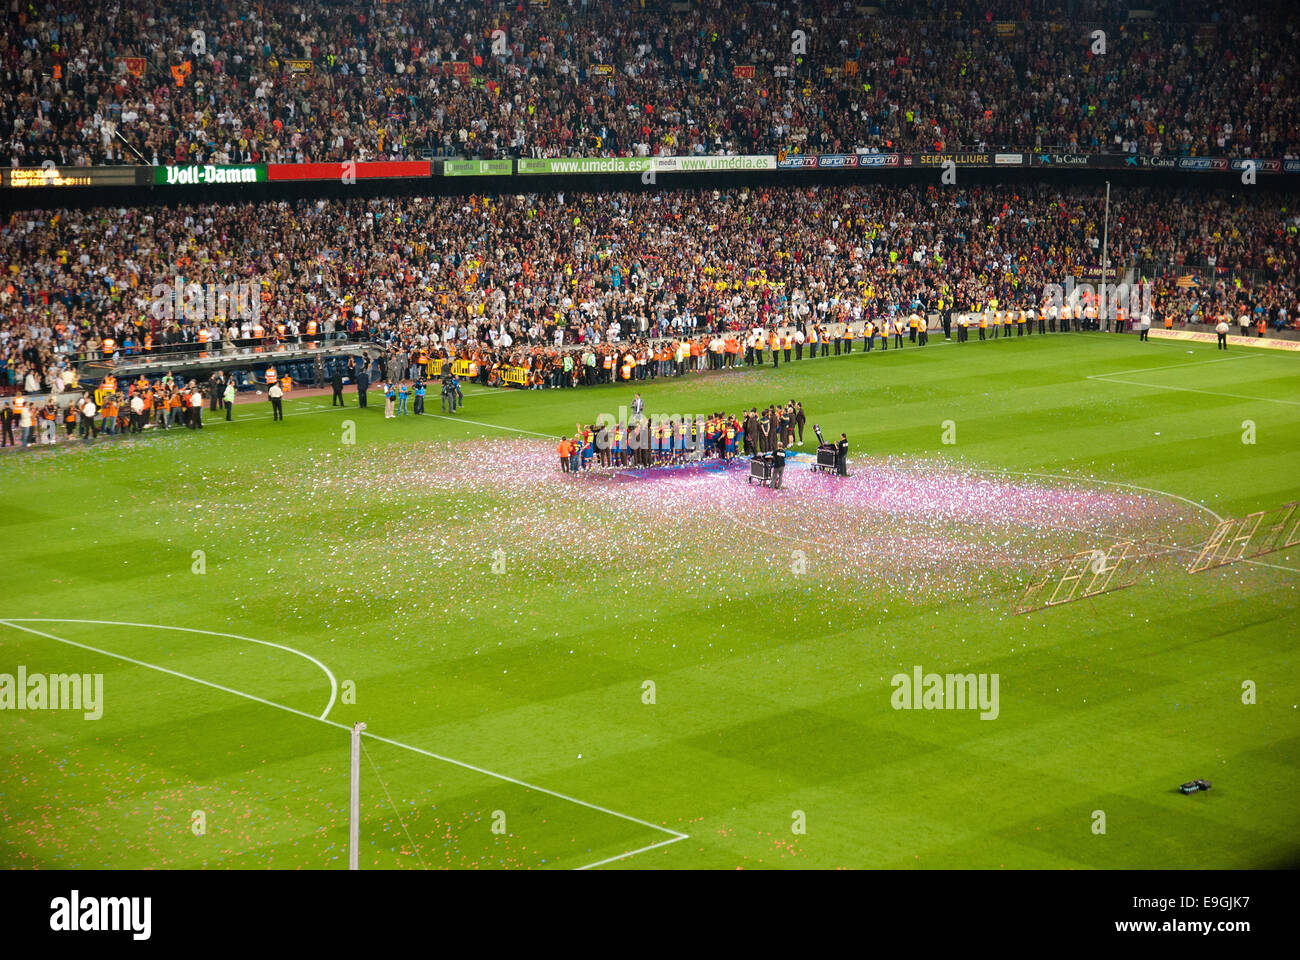 BARCELONA - MAY 23: Camp Nou Stadium after the match against Osasuna on May 23, 2009 in Barcelona, Spain. Stock Photo